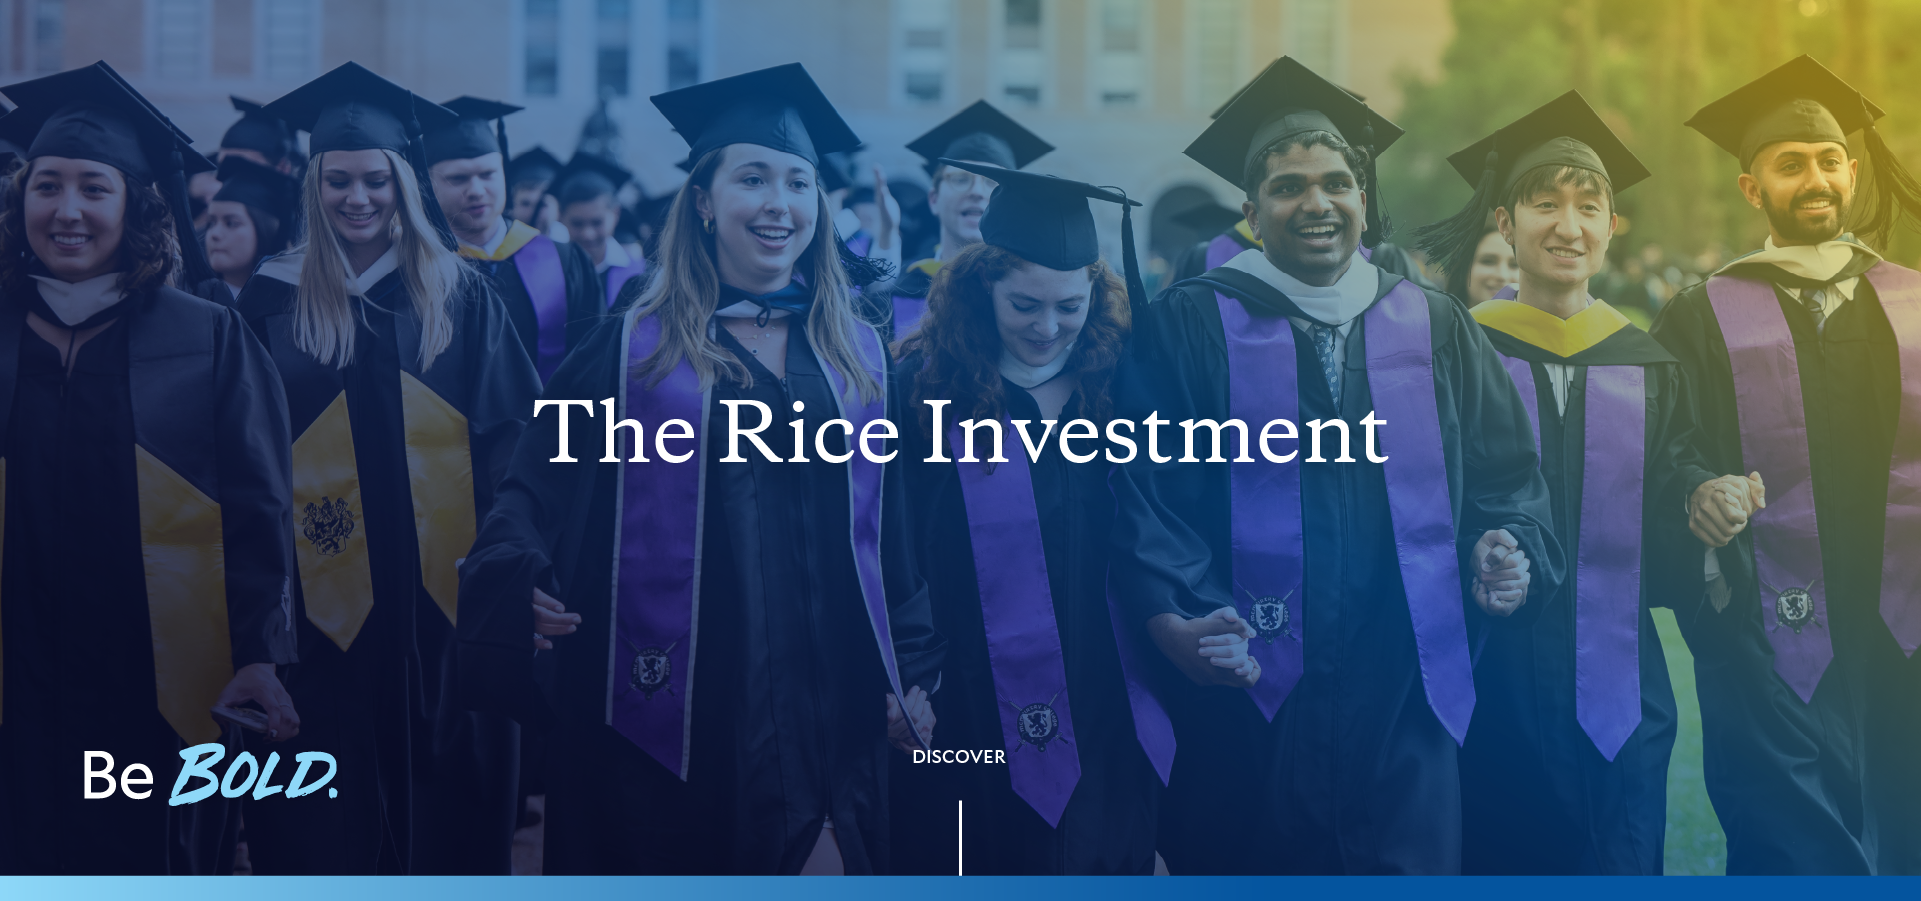 The RIce Investment